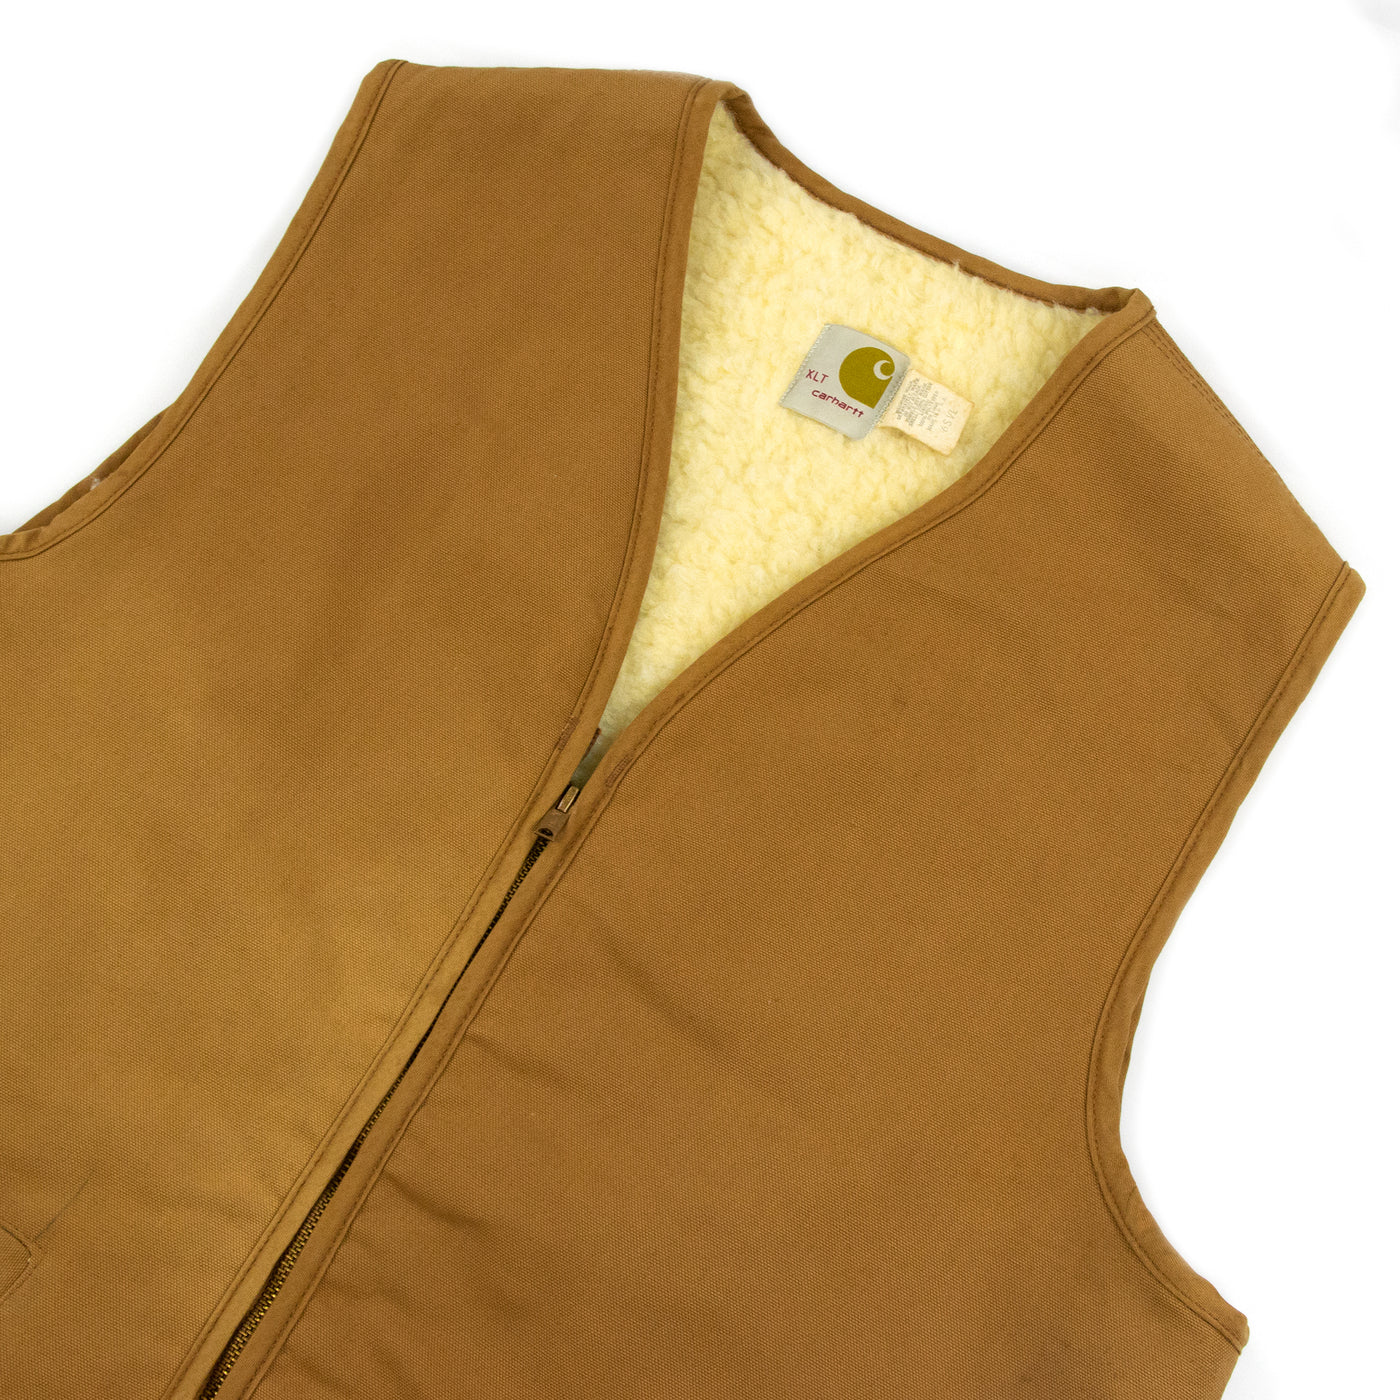 Vintage 70s Carhartt Gilet Duck Canvas Waistcoat Vest Sherpa Lined USA Made XL  BACK NECK LABEL 